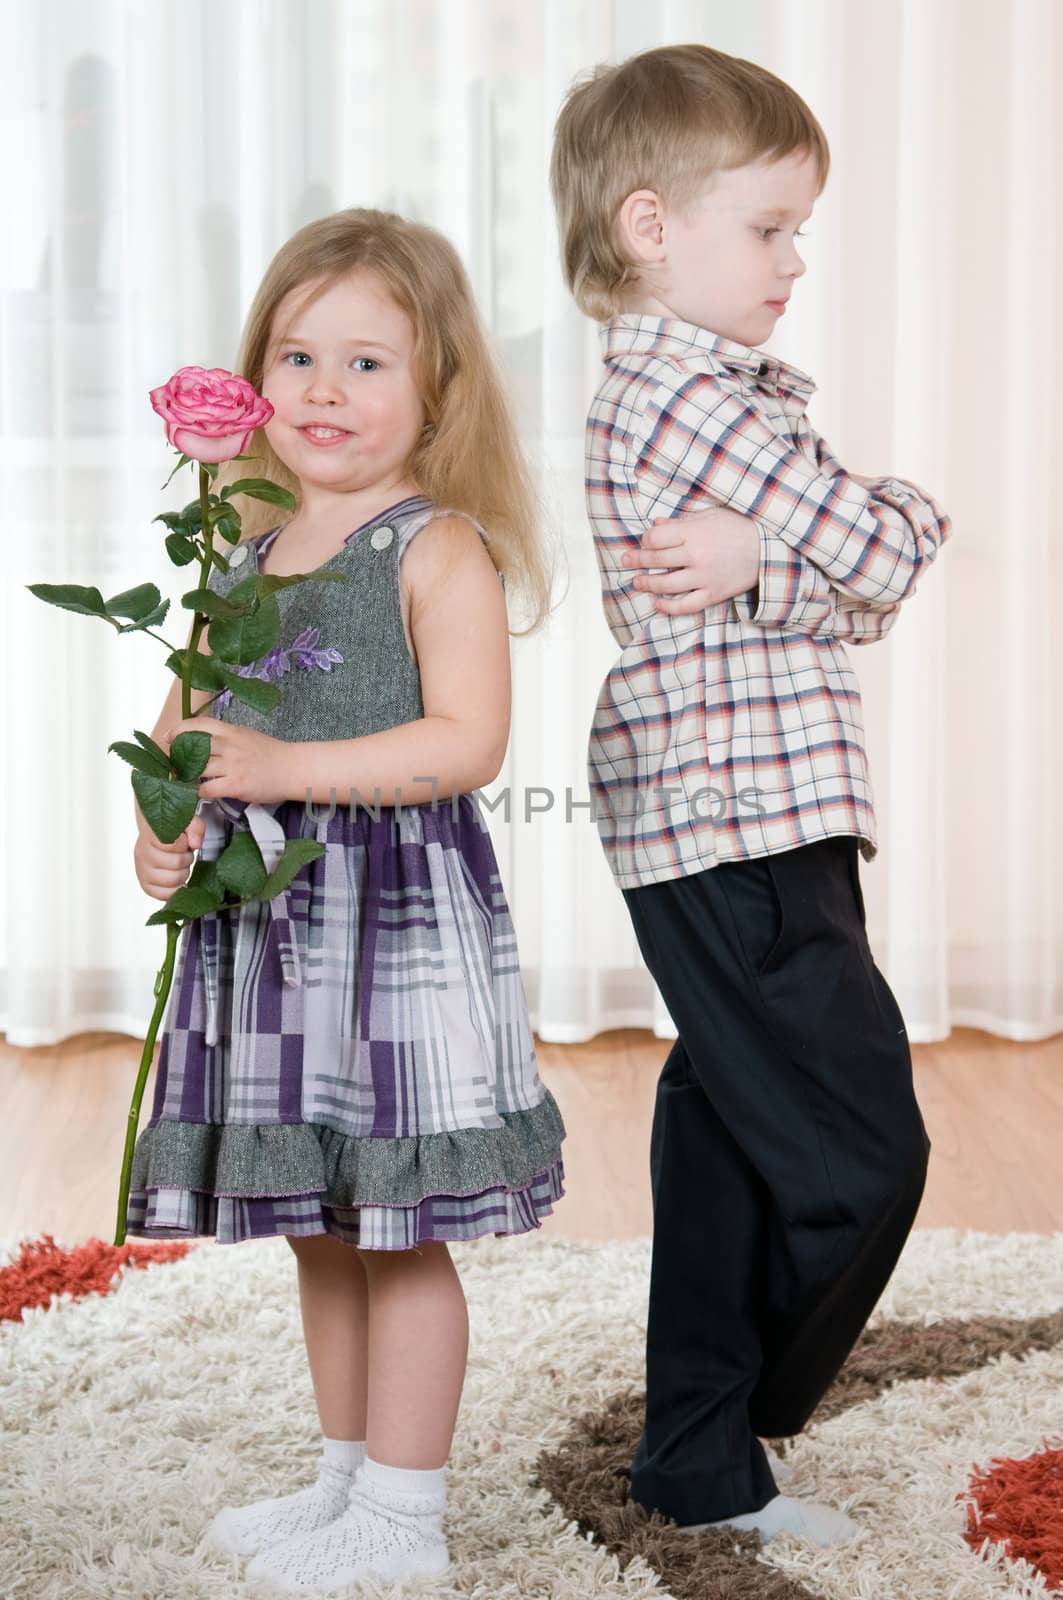 The little boy gives to the girl a  flowers